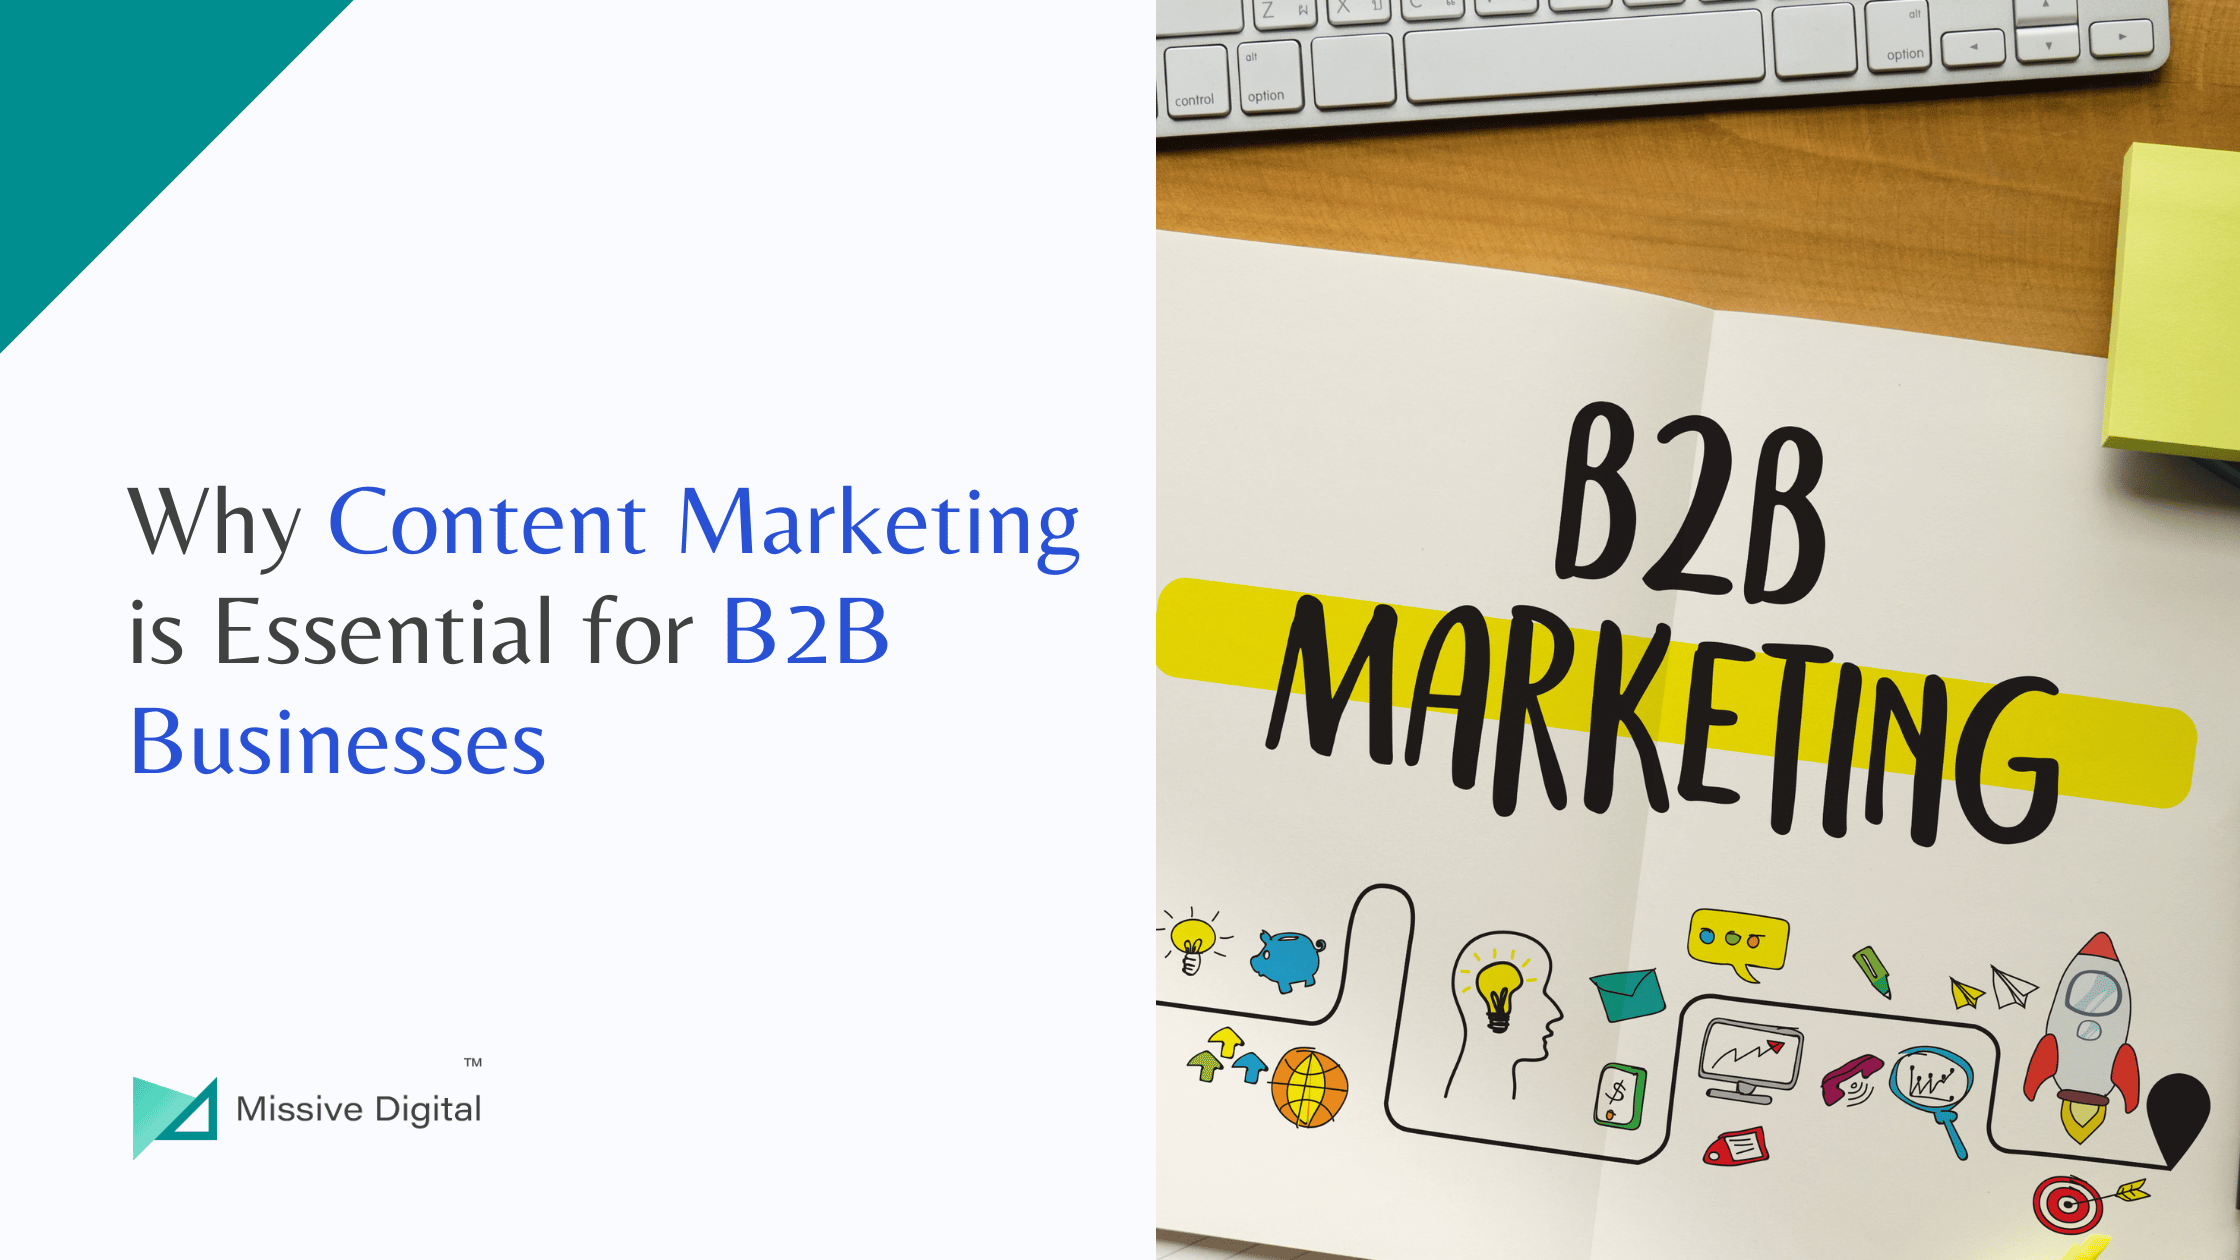 Why Content Marketing is Essential for B2B Businesses